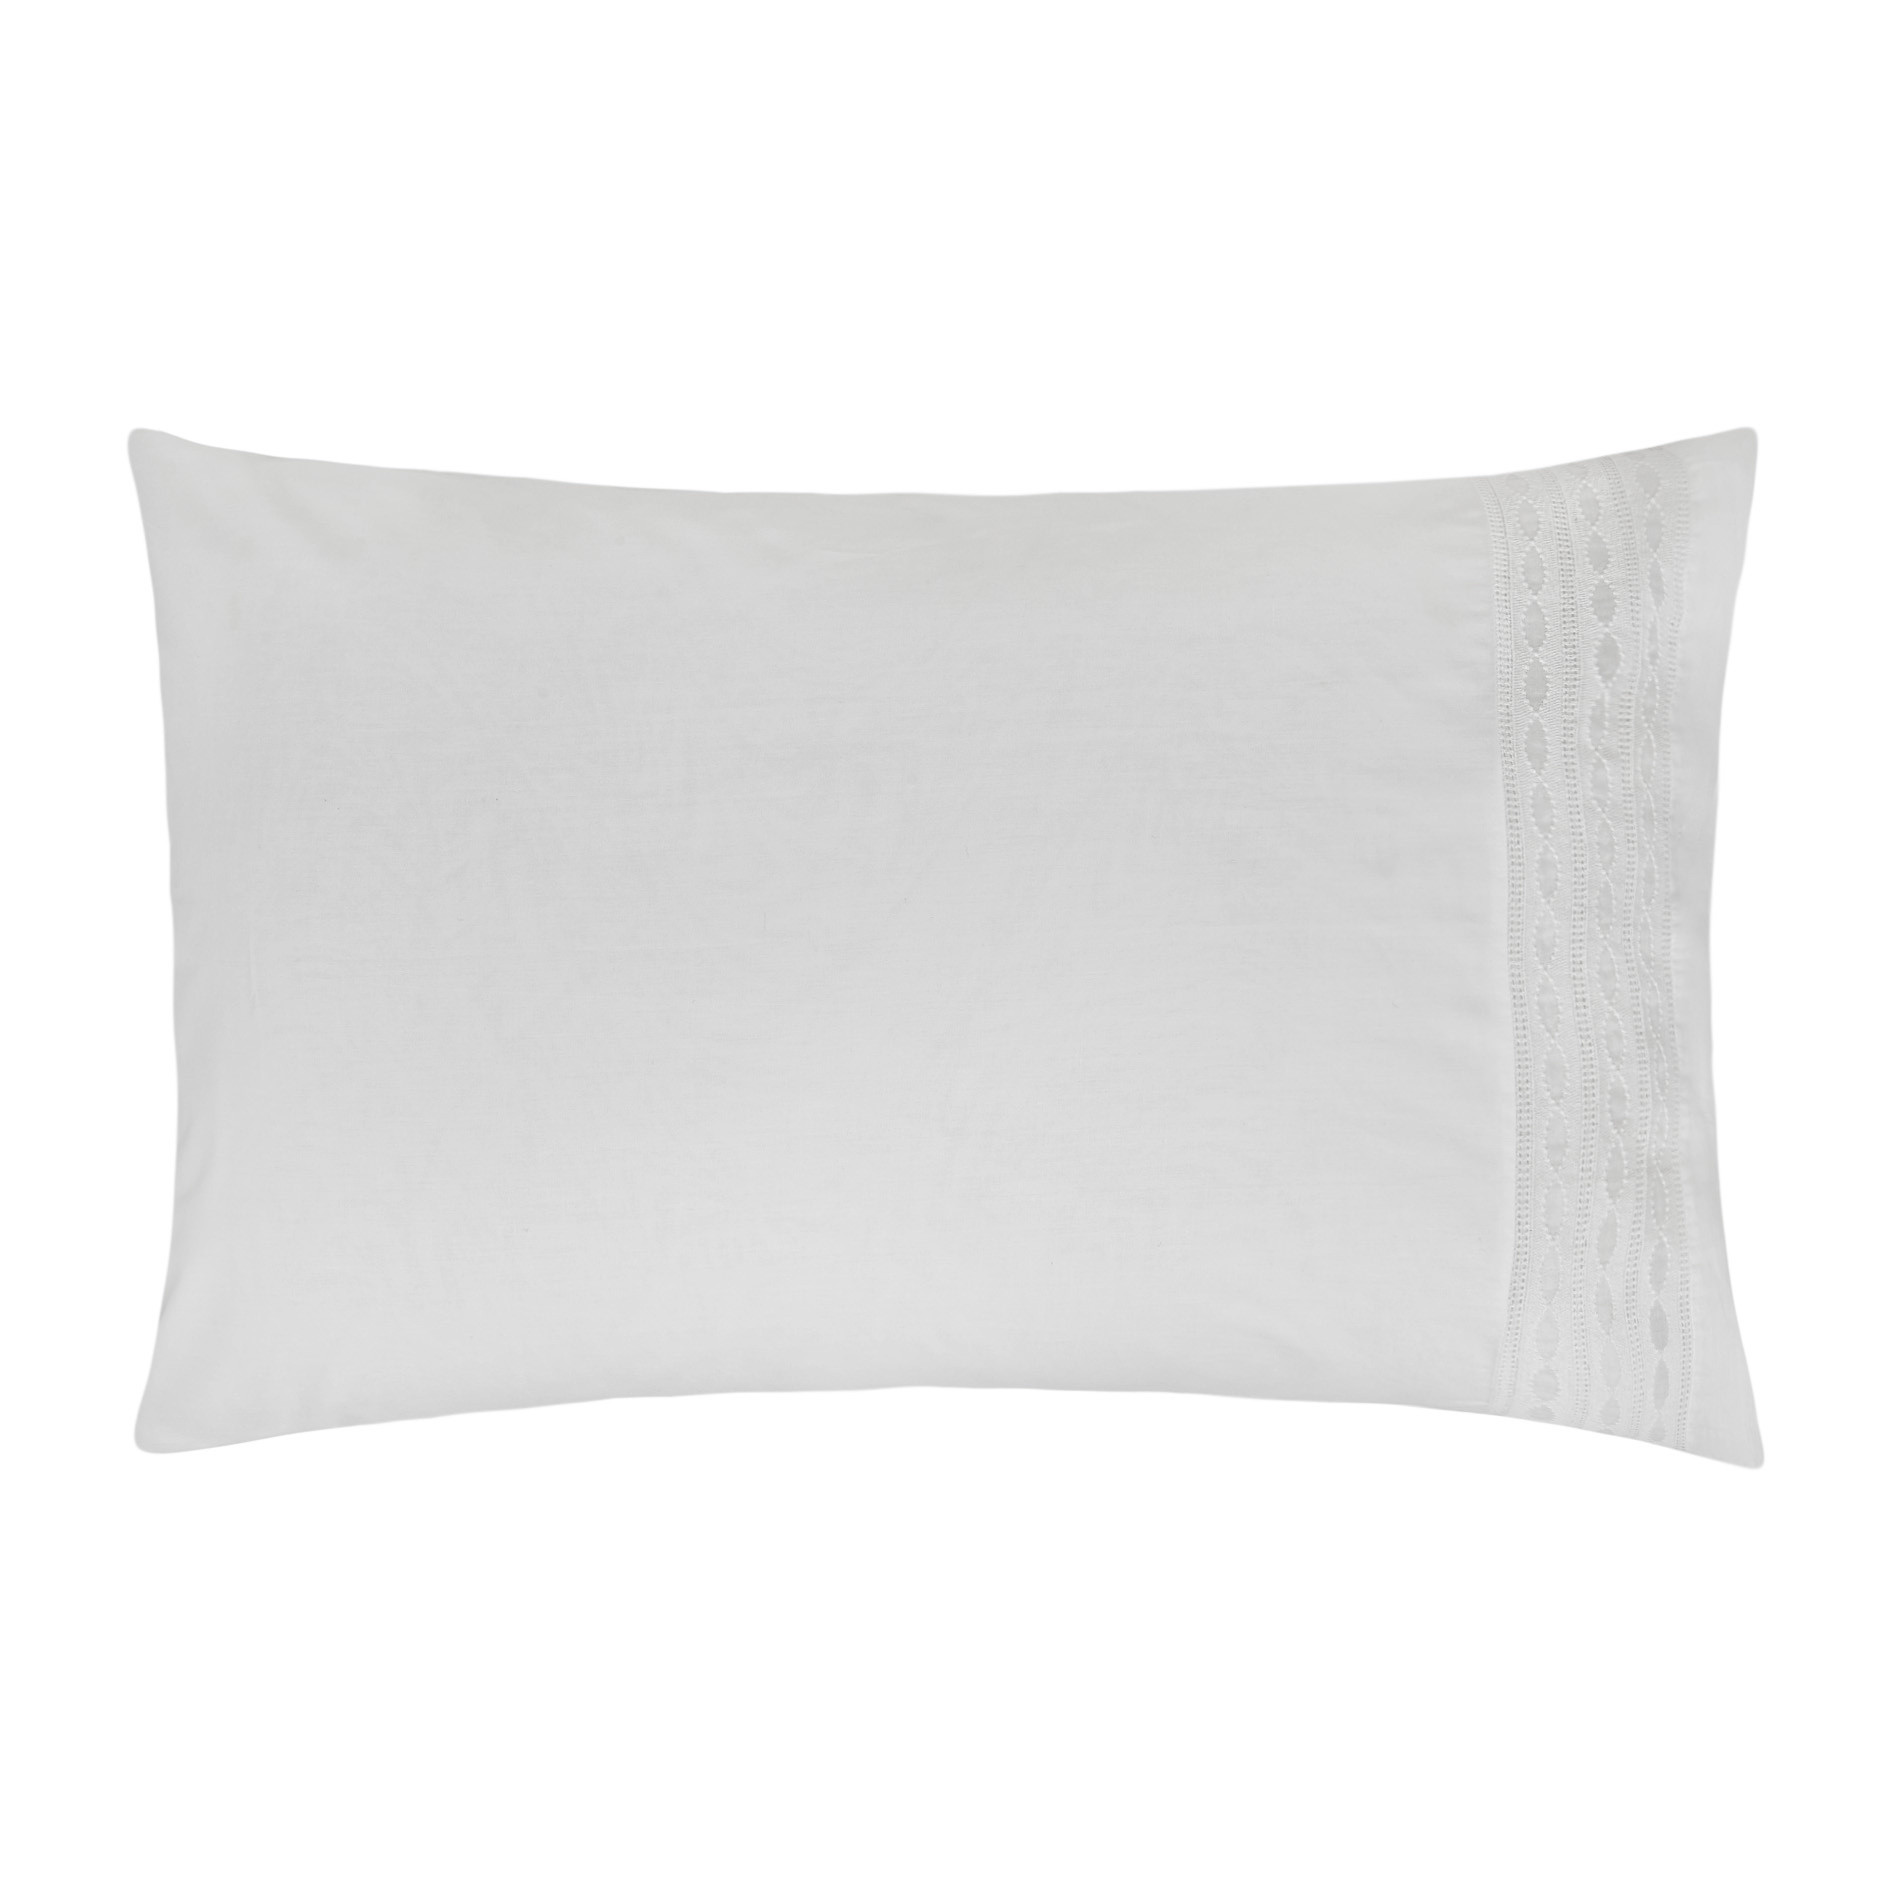 Portofino pillowcase in 100% cotton with embroidered trim, White, large image number 0